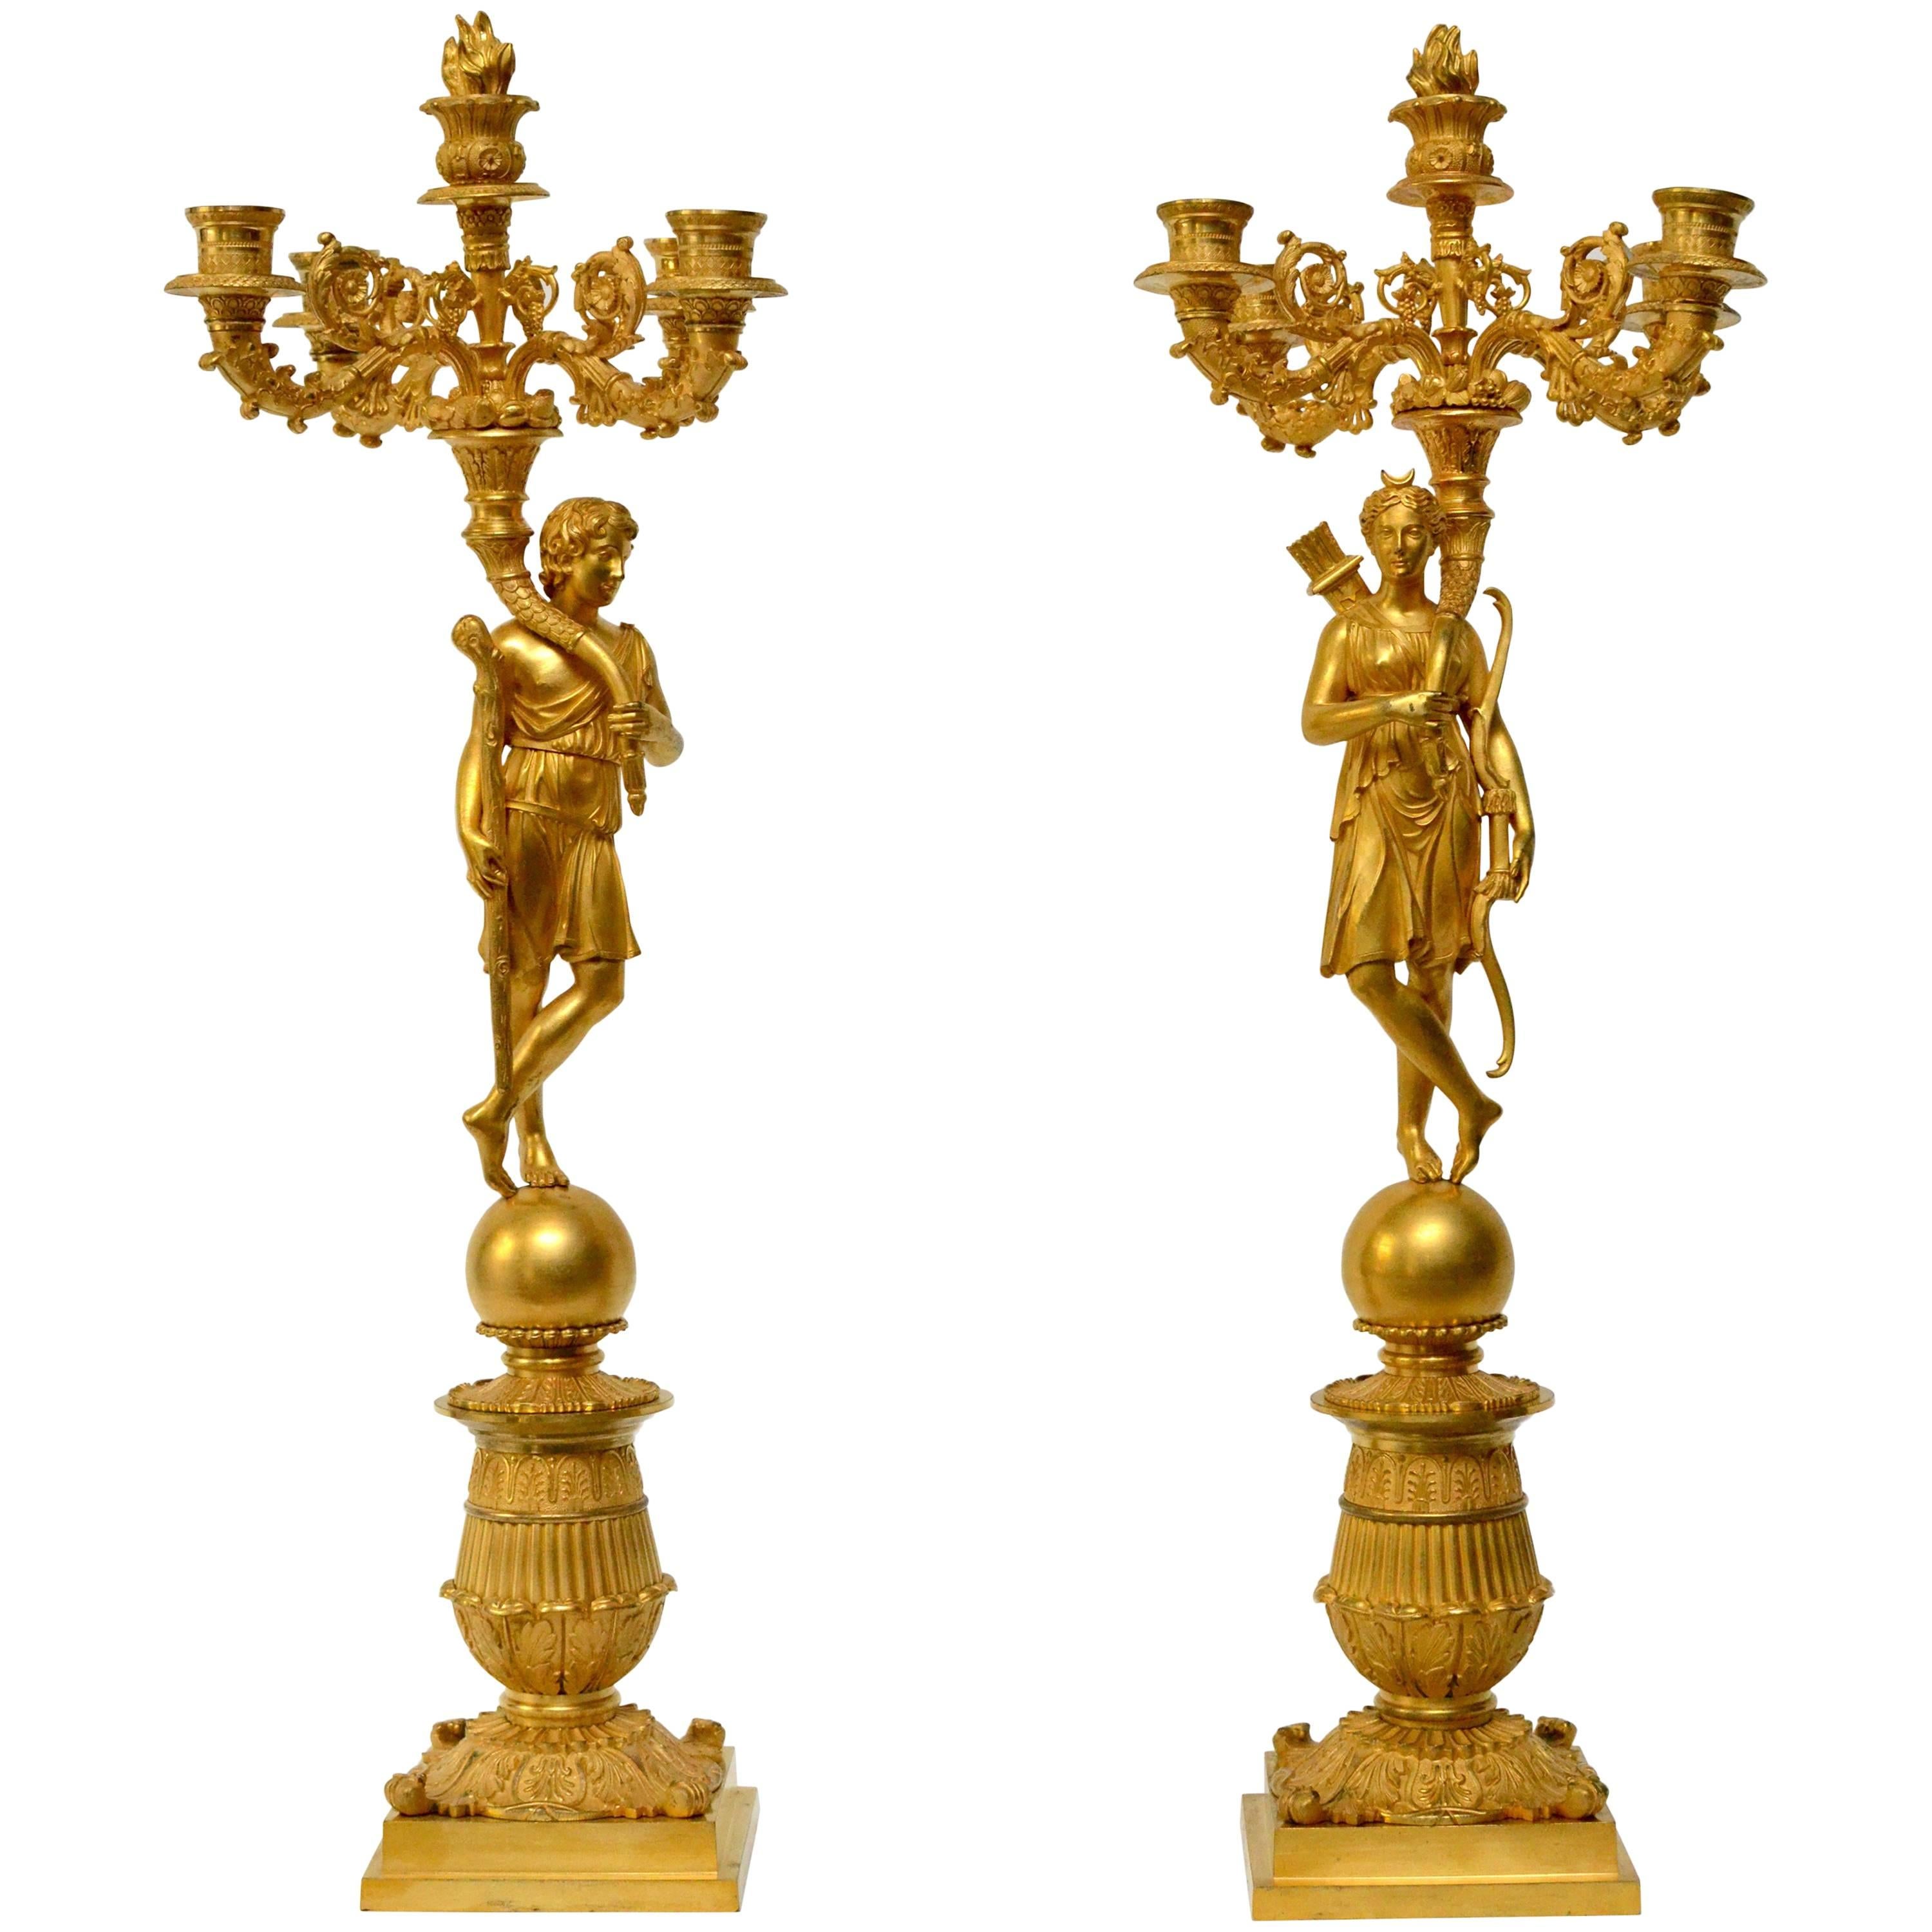 Pair of French Gilt Bronze and Patinated Empire Candelabra, circa 1825